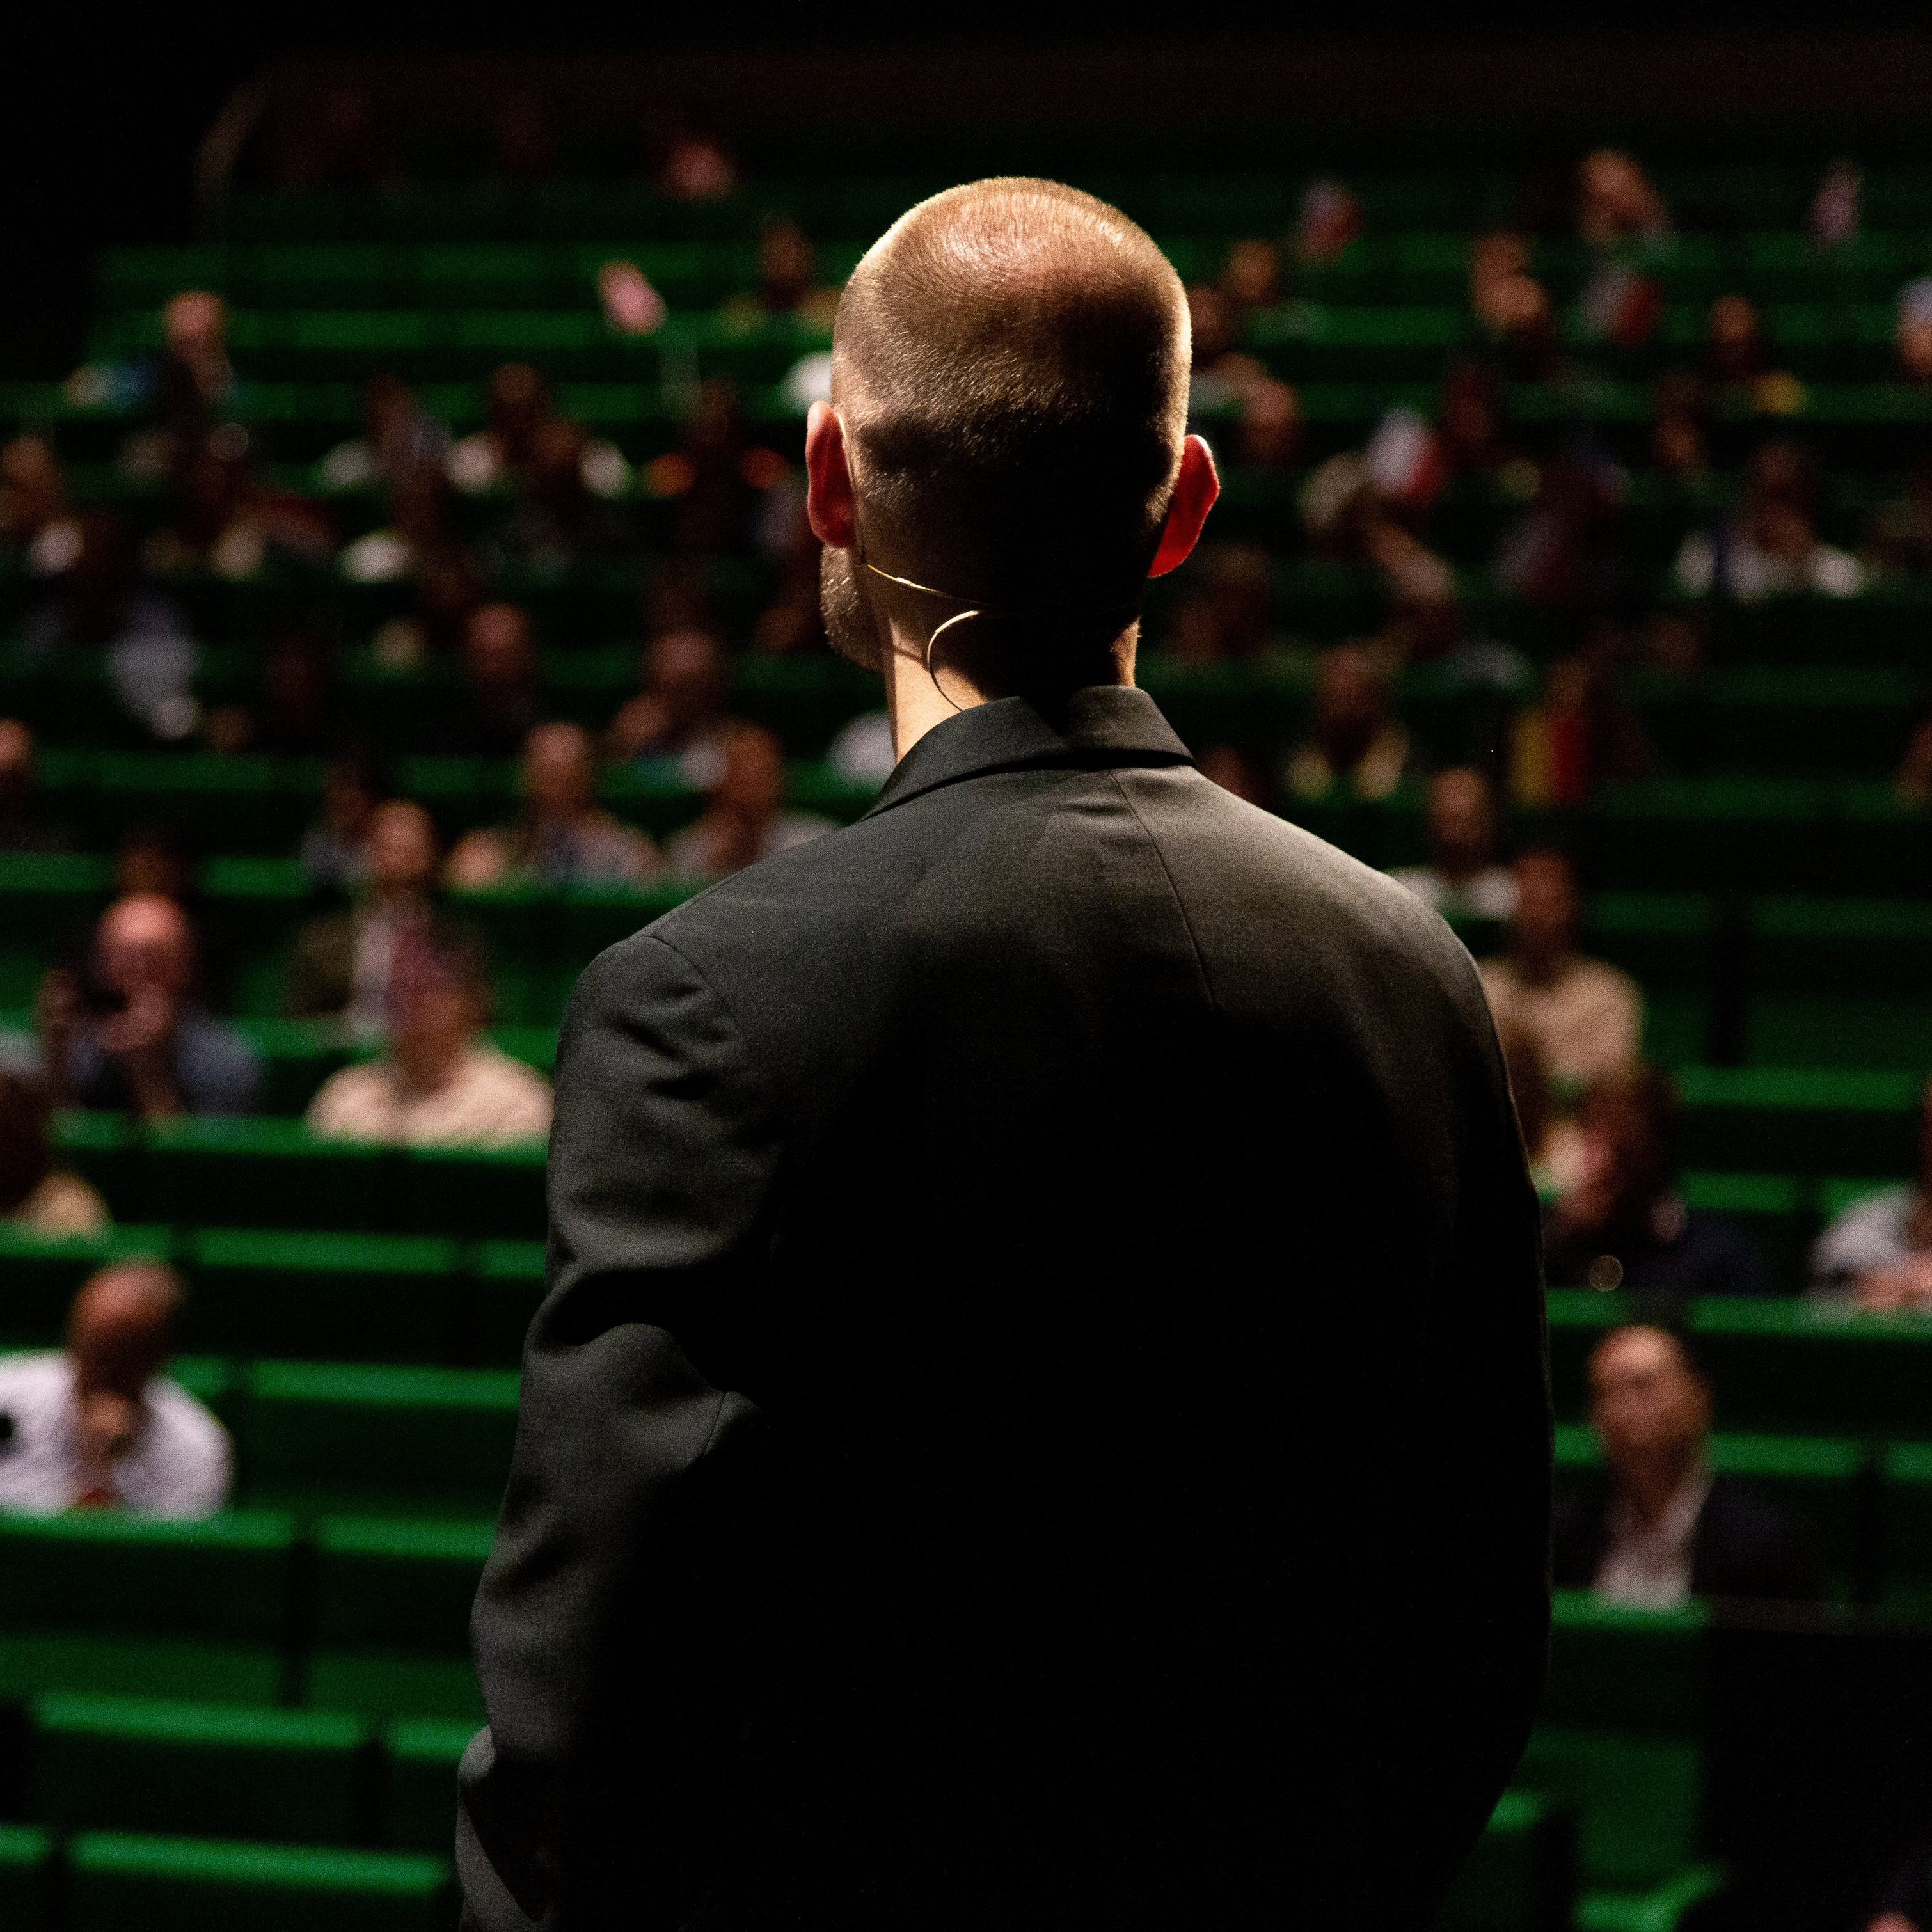 Man in black suit facing an audience in a green-seated auditorium